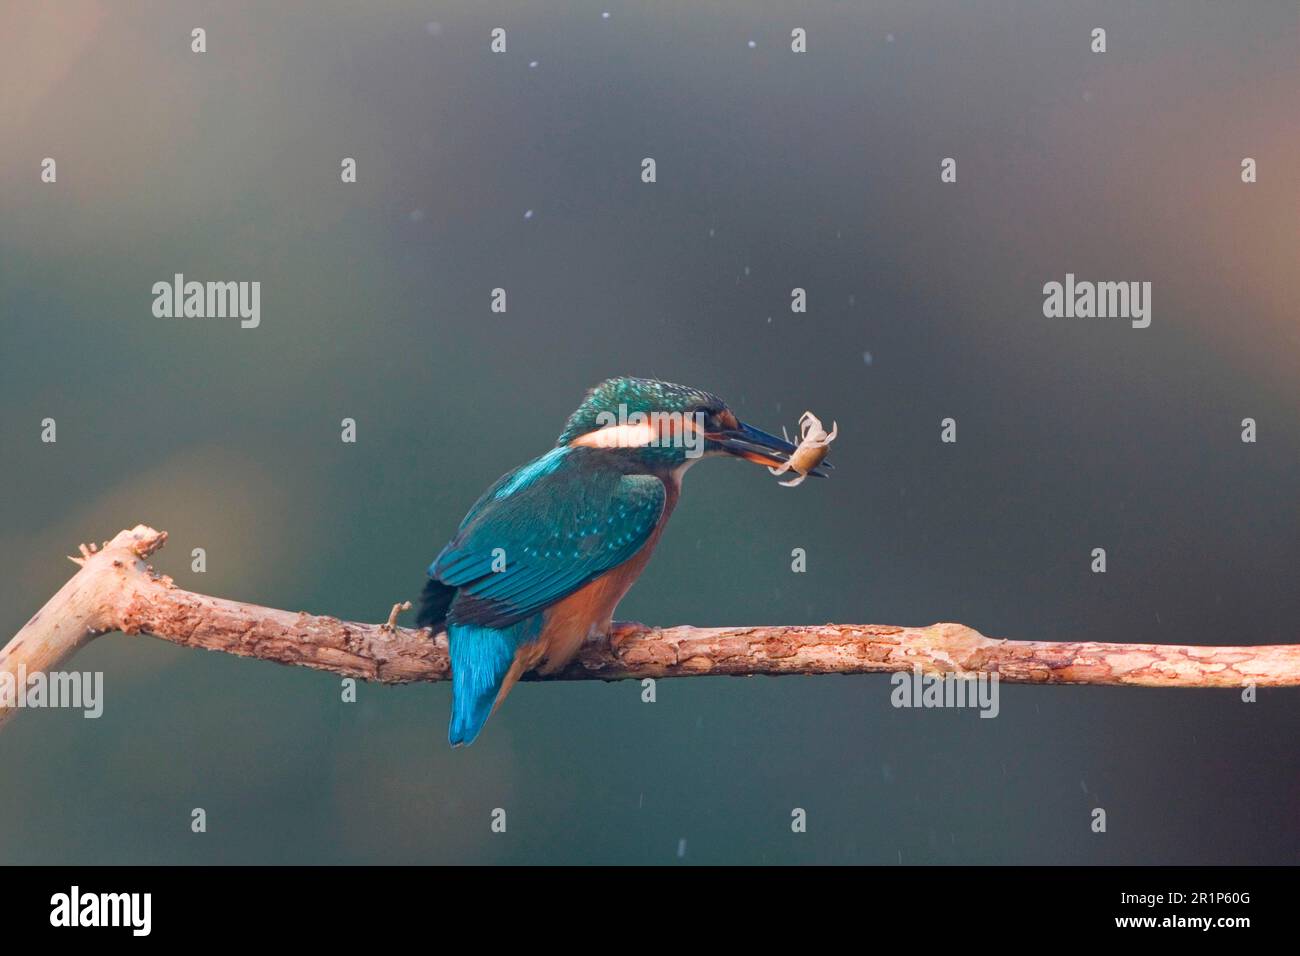 Common kingfisher (Alcedo atthis), young female, meets european green crab (Carcinus maenas) on prey on branch, Suffolk, England, United Kingdom Stock Photo